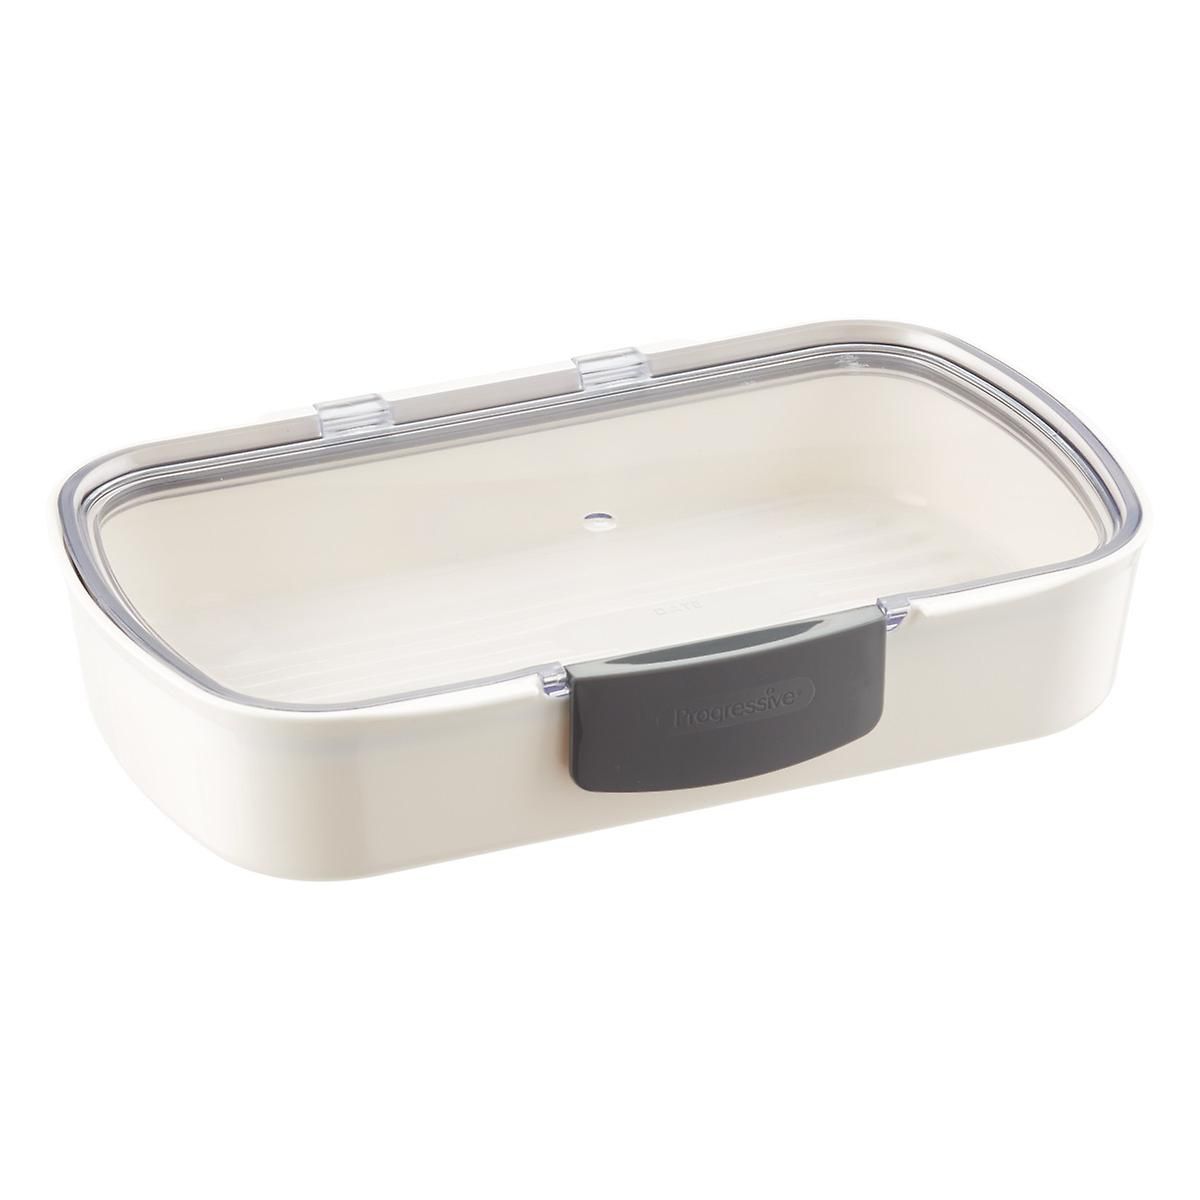 ProKeeper Deli Container | The Container Store